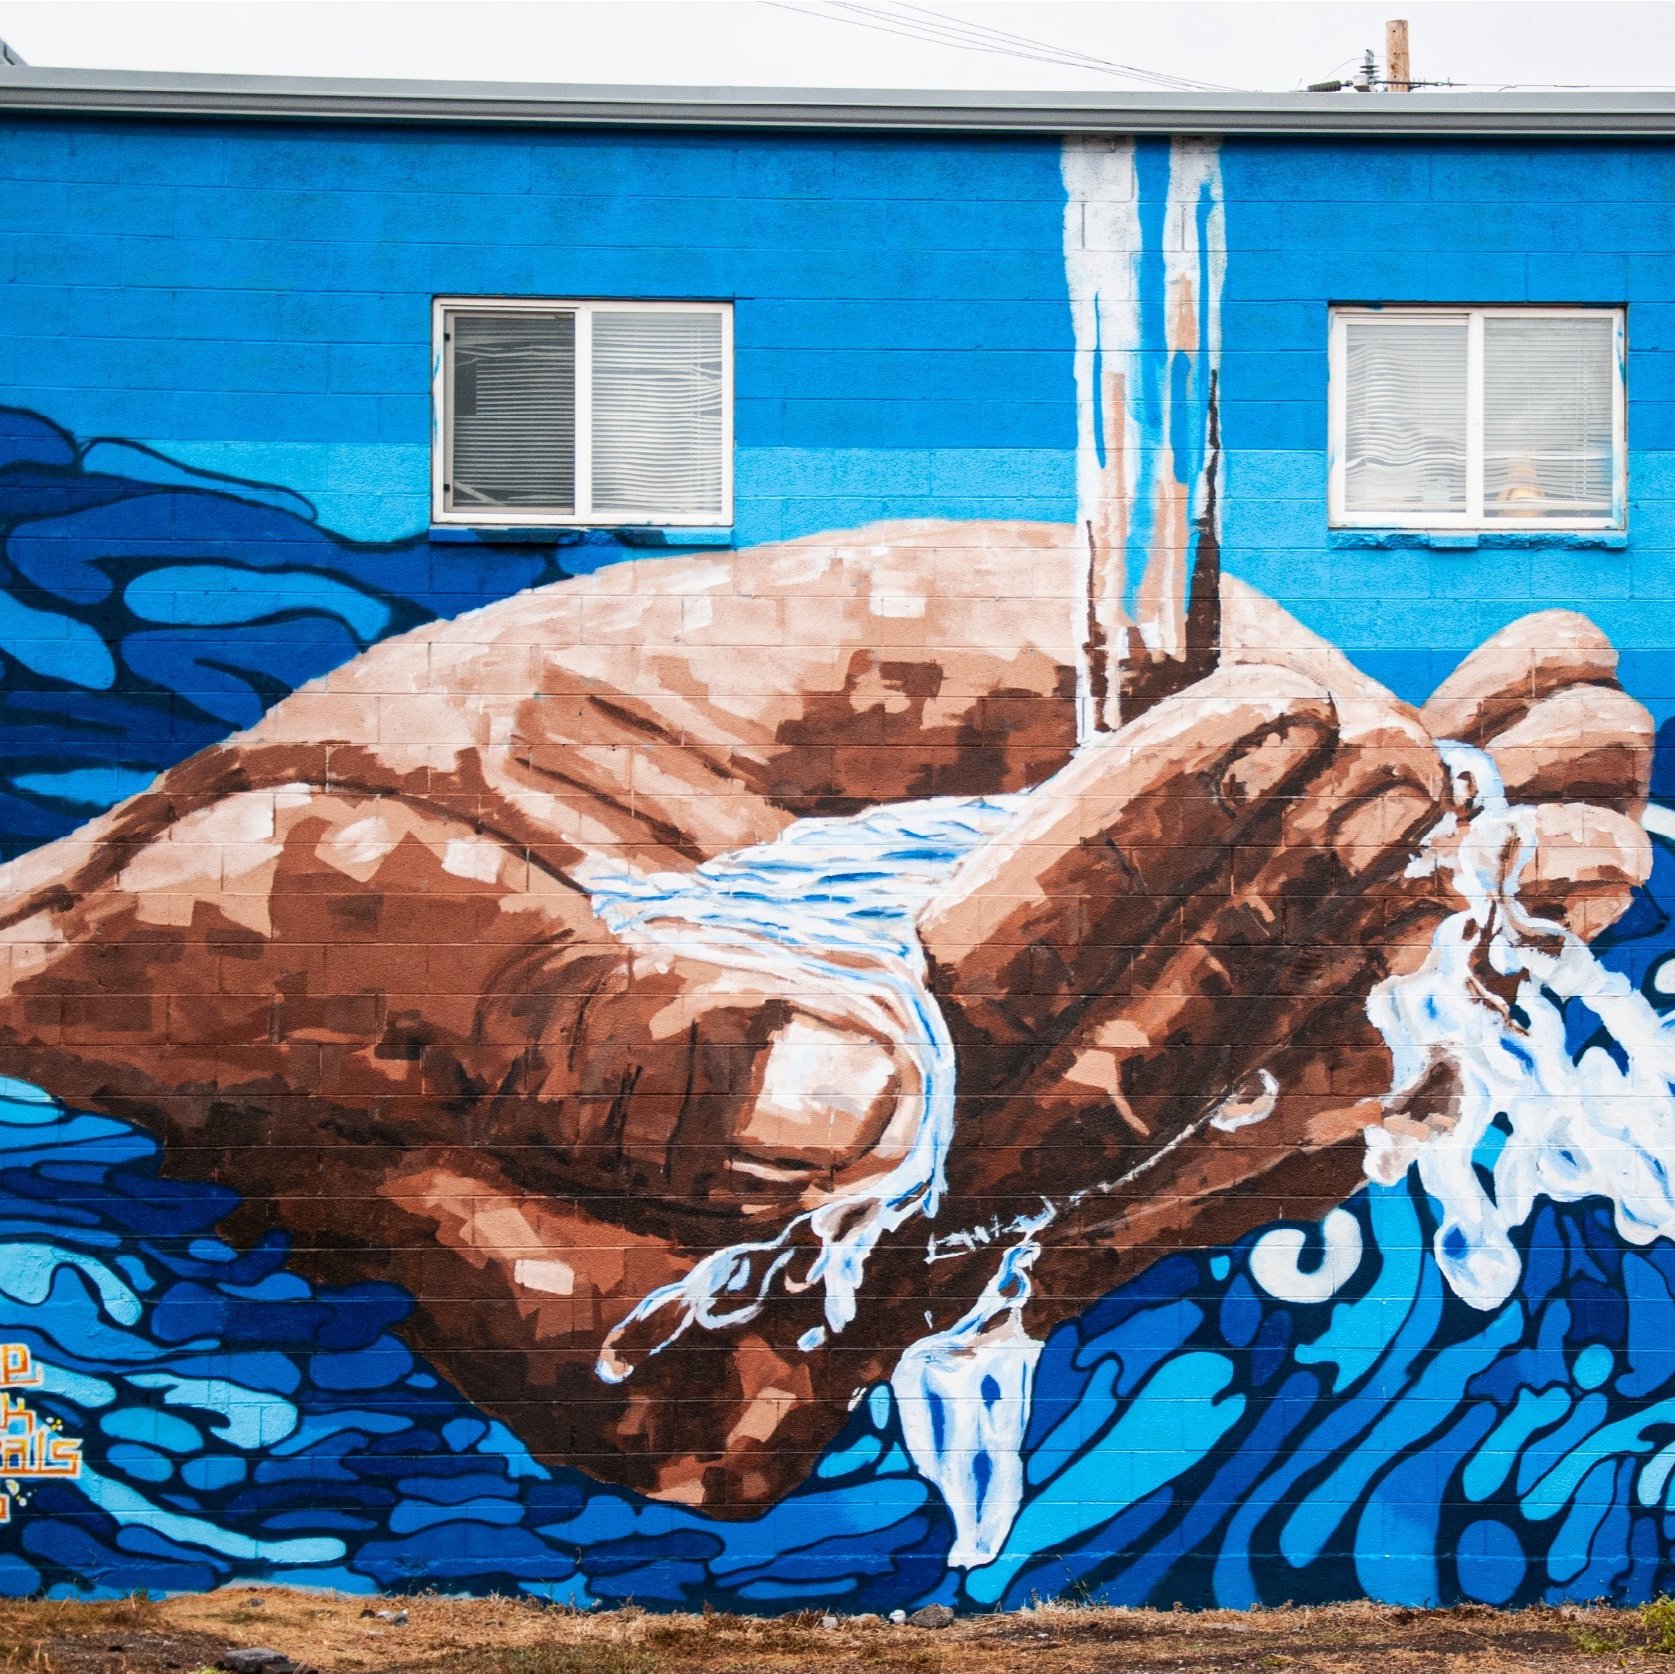 Hands+Holding+Water+in+2023+Folsom+Trail+Mural+Project+by+Roots+Art+Kollective+in+Salt+Lake+City.jpg